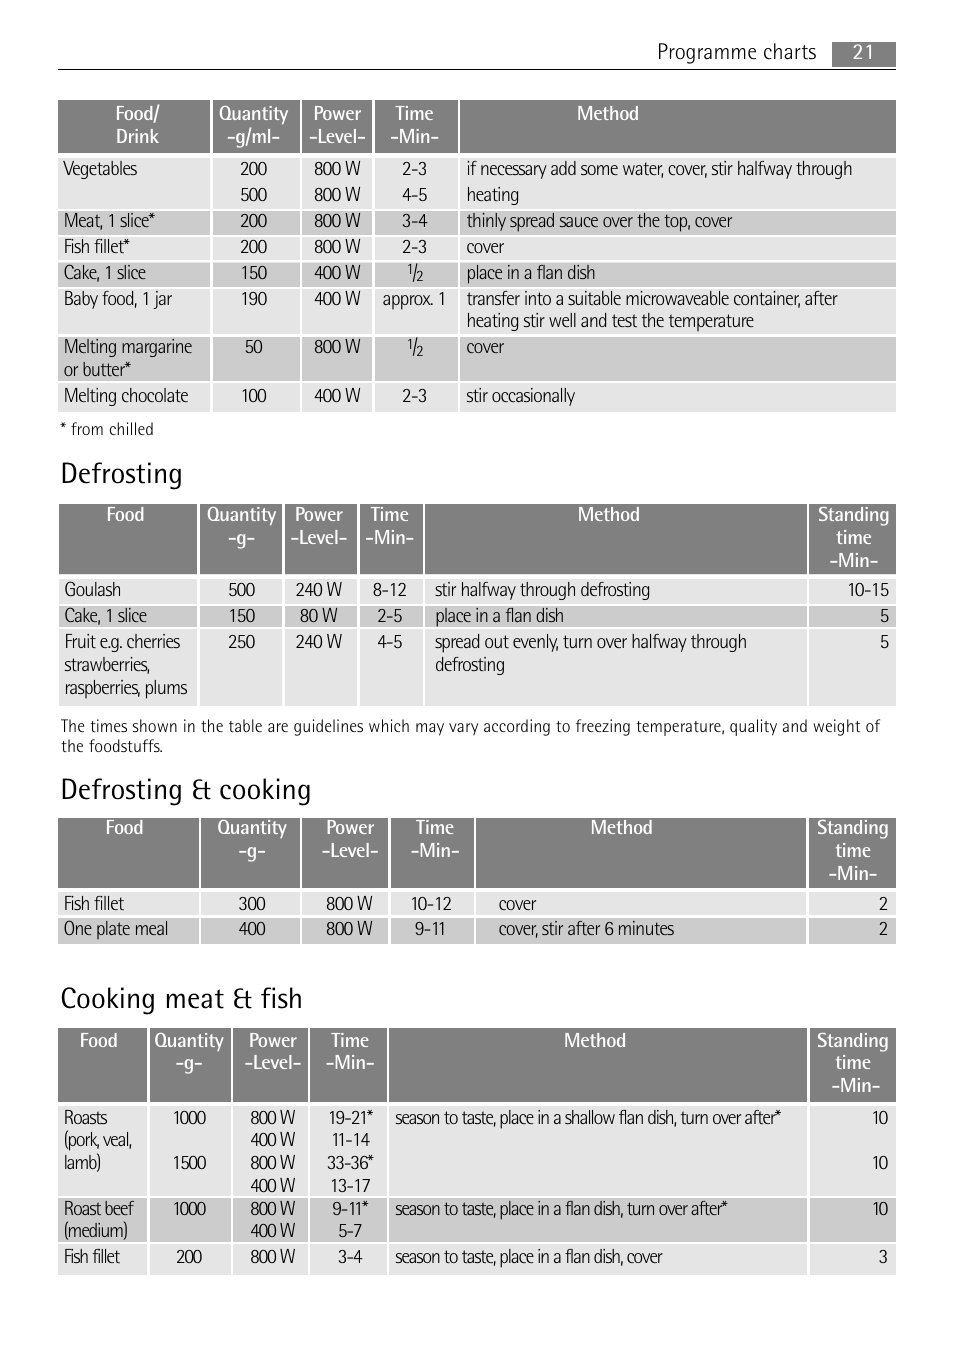 Defrosting, Defrosting & cooking, Cooking meat & fish | AEG MC2664E-W User Manual | Page 21 / 36